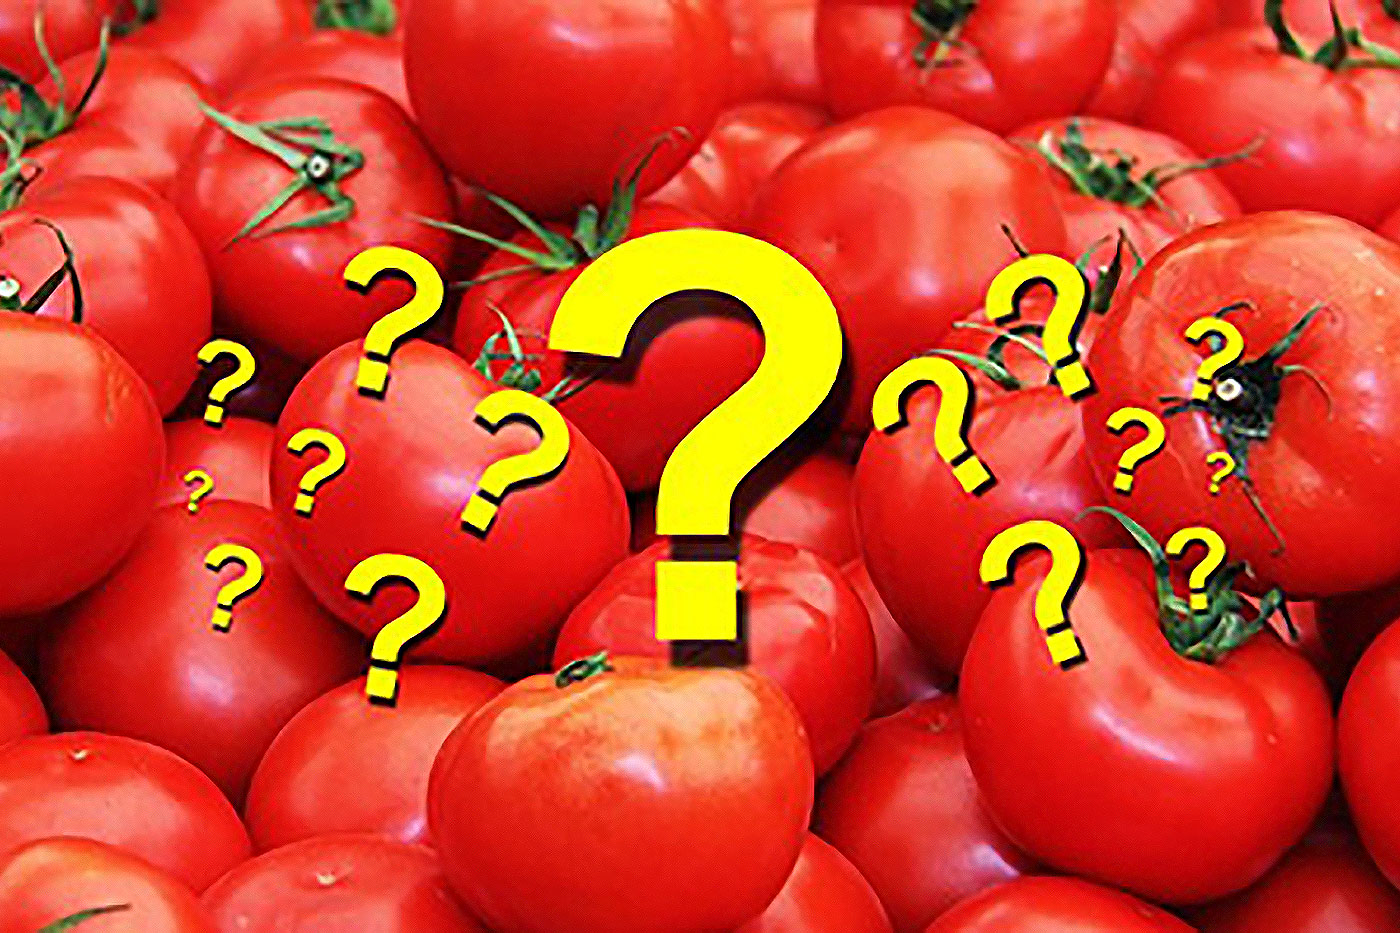 tomatoes and question marks